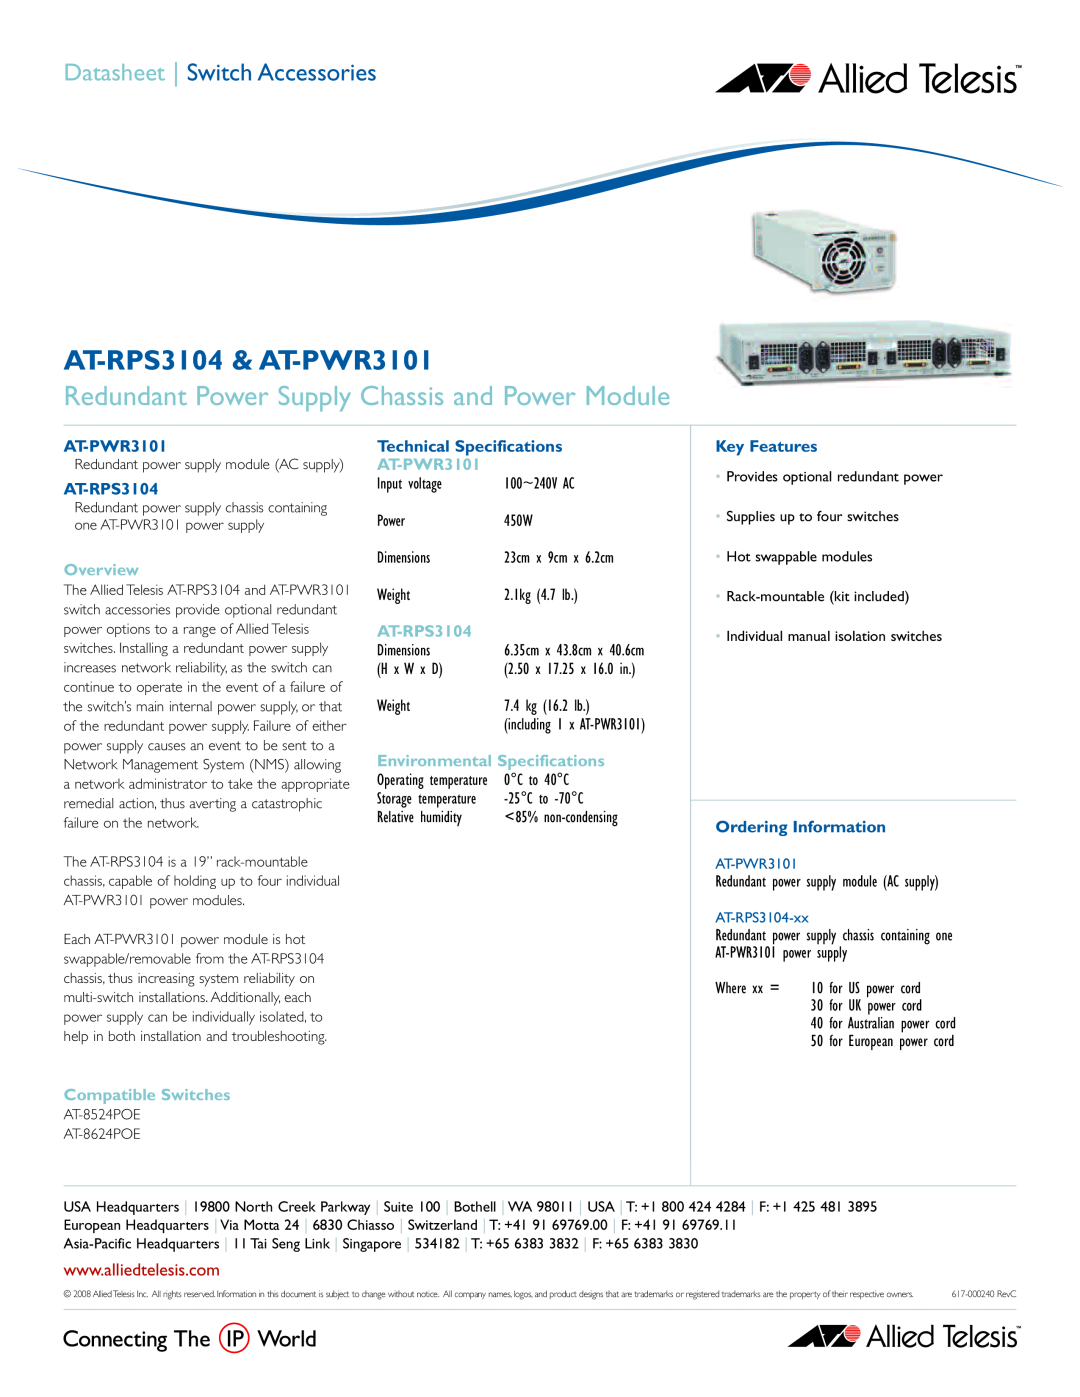 Allied Telesis technical specifications AT-RPS3104 & AT-PWR3101, Redundant Power Supply Chassis and Power Module 